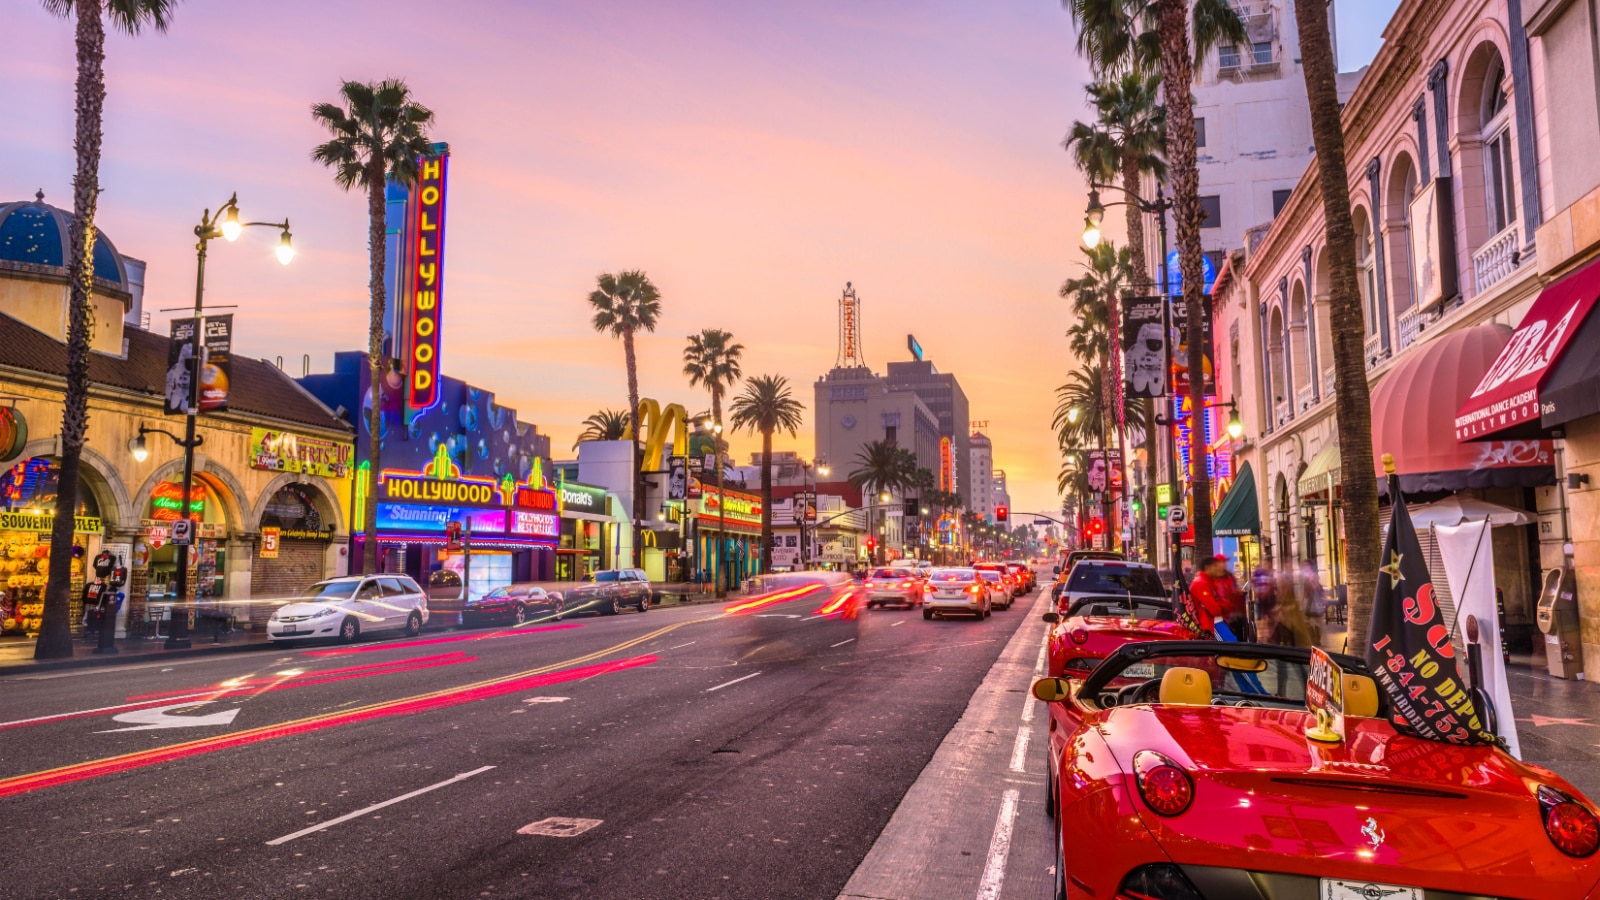 LOS ANGELES, CALIFORNIA - MARCH 1, 2016: Traffic on Hollywood Boulevard at dusk. The theater district is a famous tourist attraction.